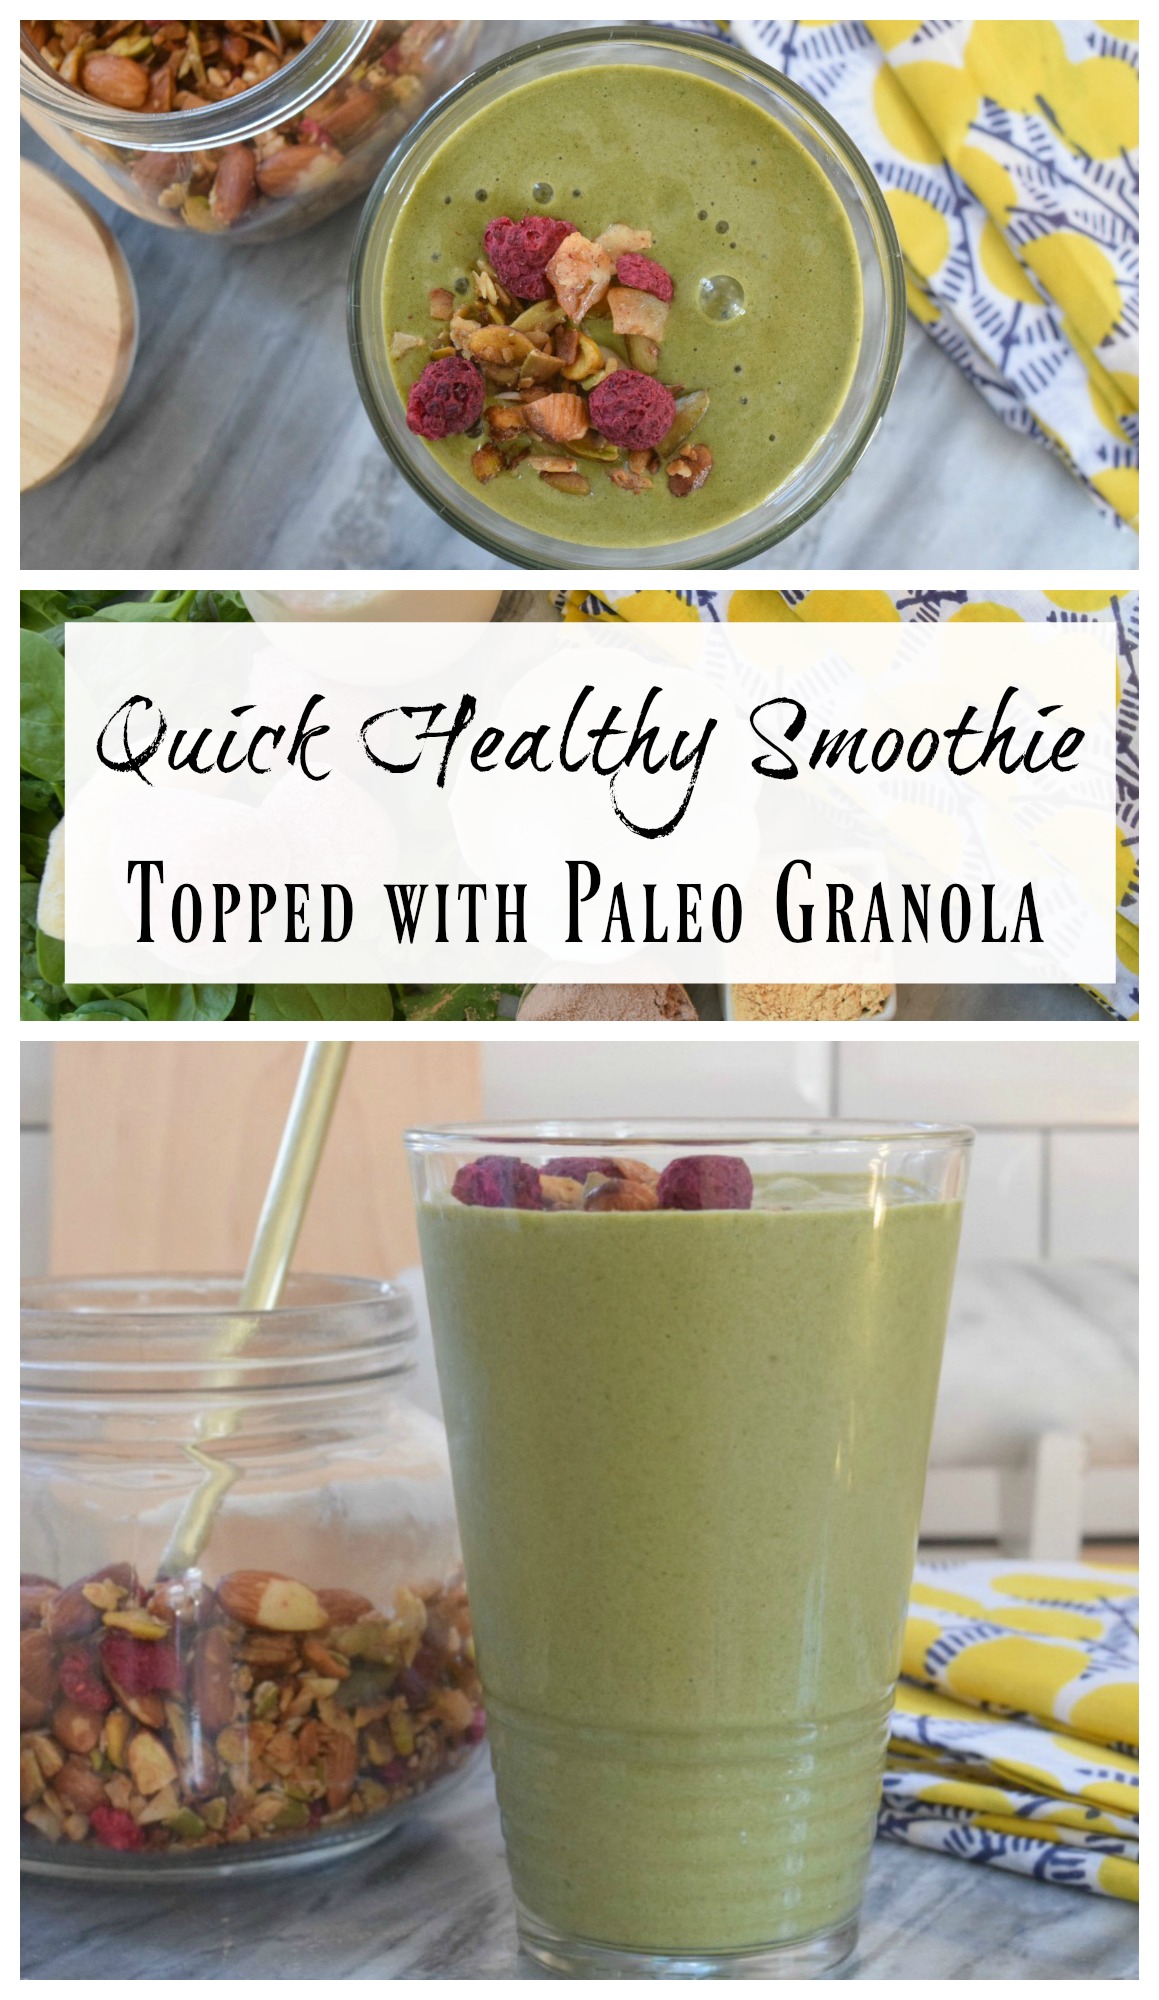 Quick Healthy Smoothie- Topped with Paleo Granola